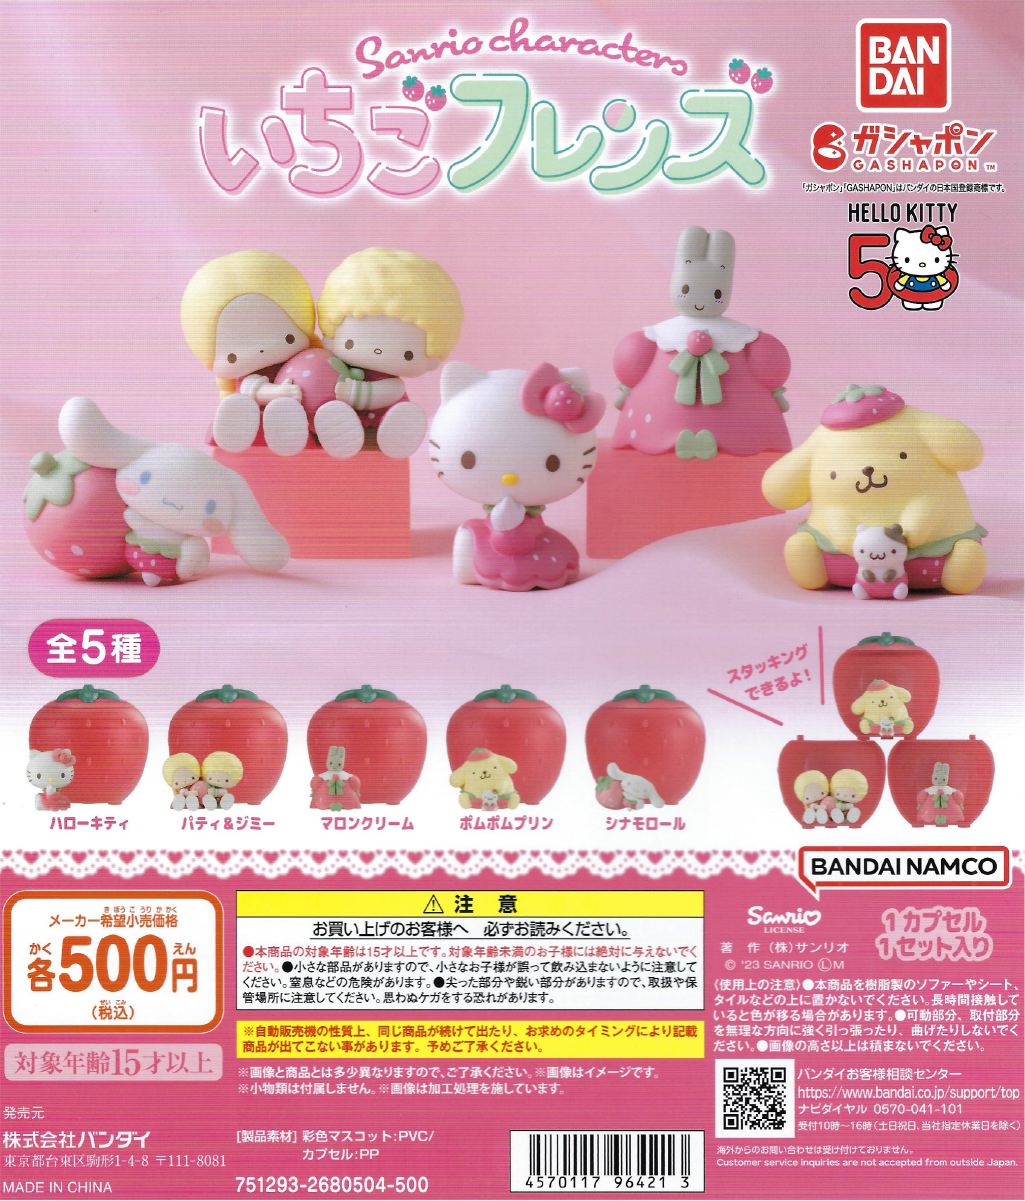 Sanrio Characters - Strawberry Friends Part 1 (20 Pieces)